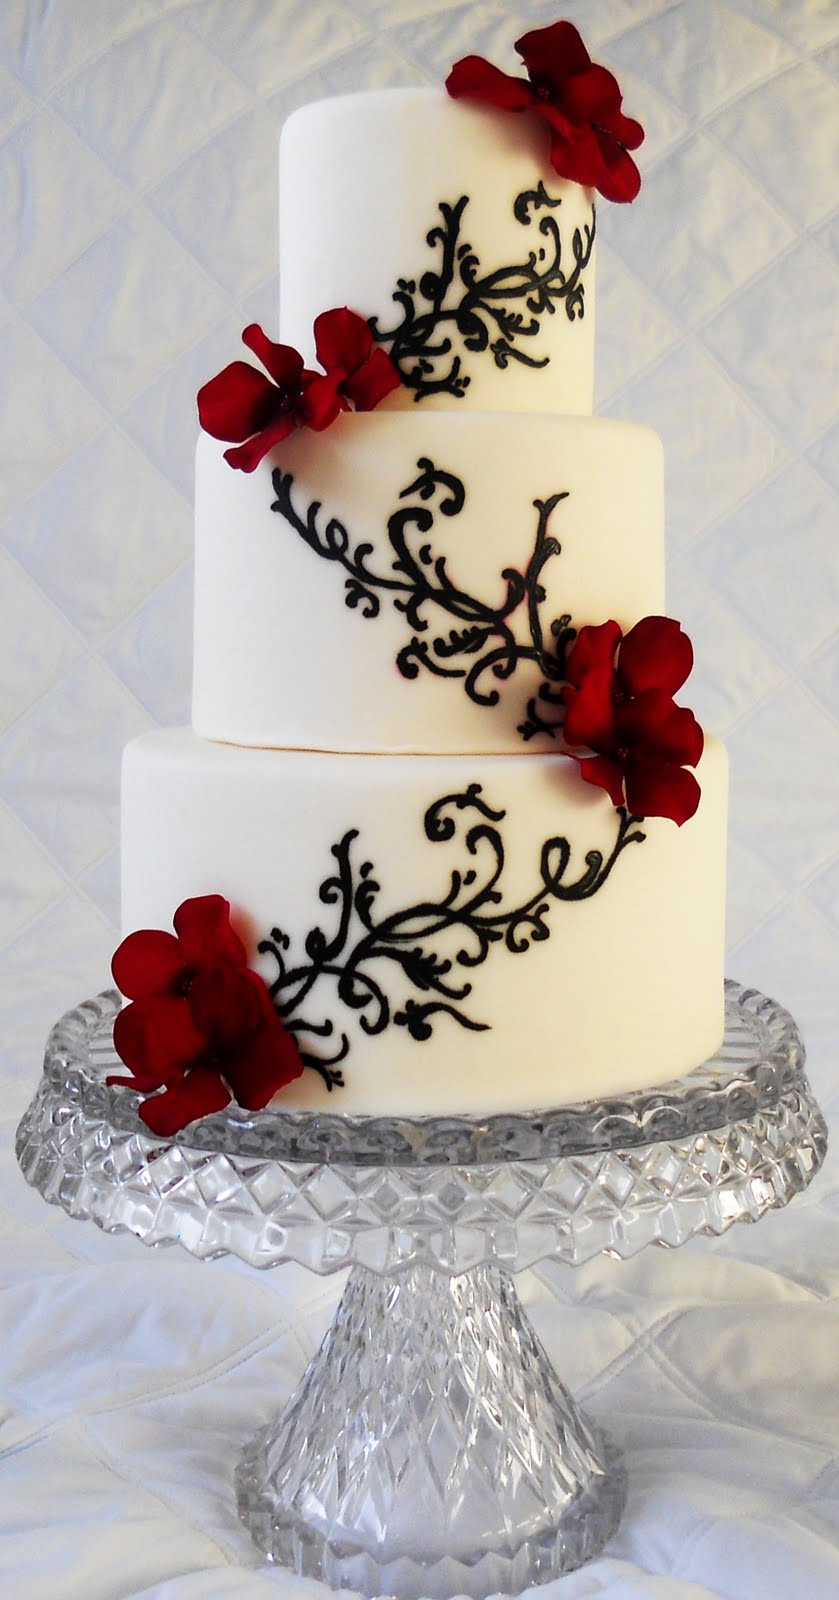 White And Red Wedding Cakes
 Memorable Wedding Find the Best Red Black and White